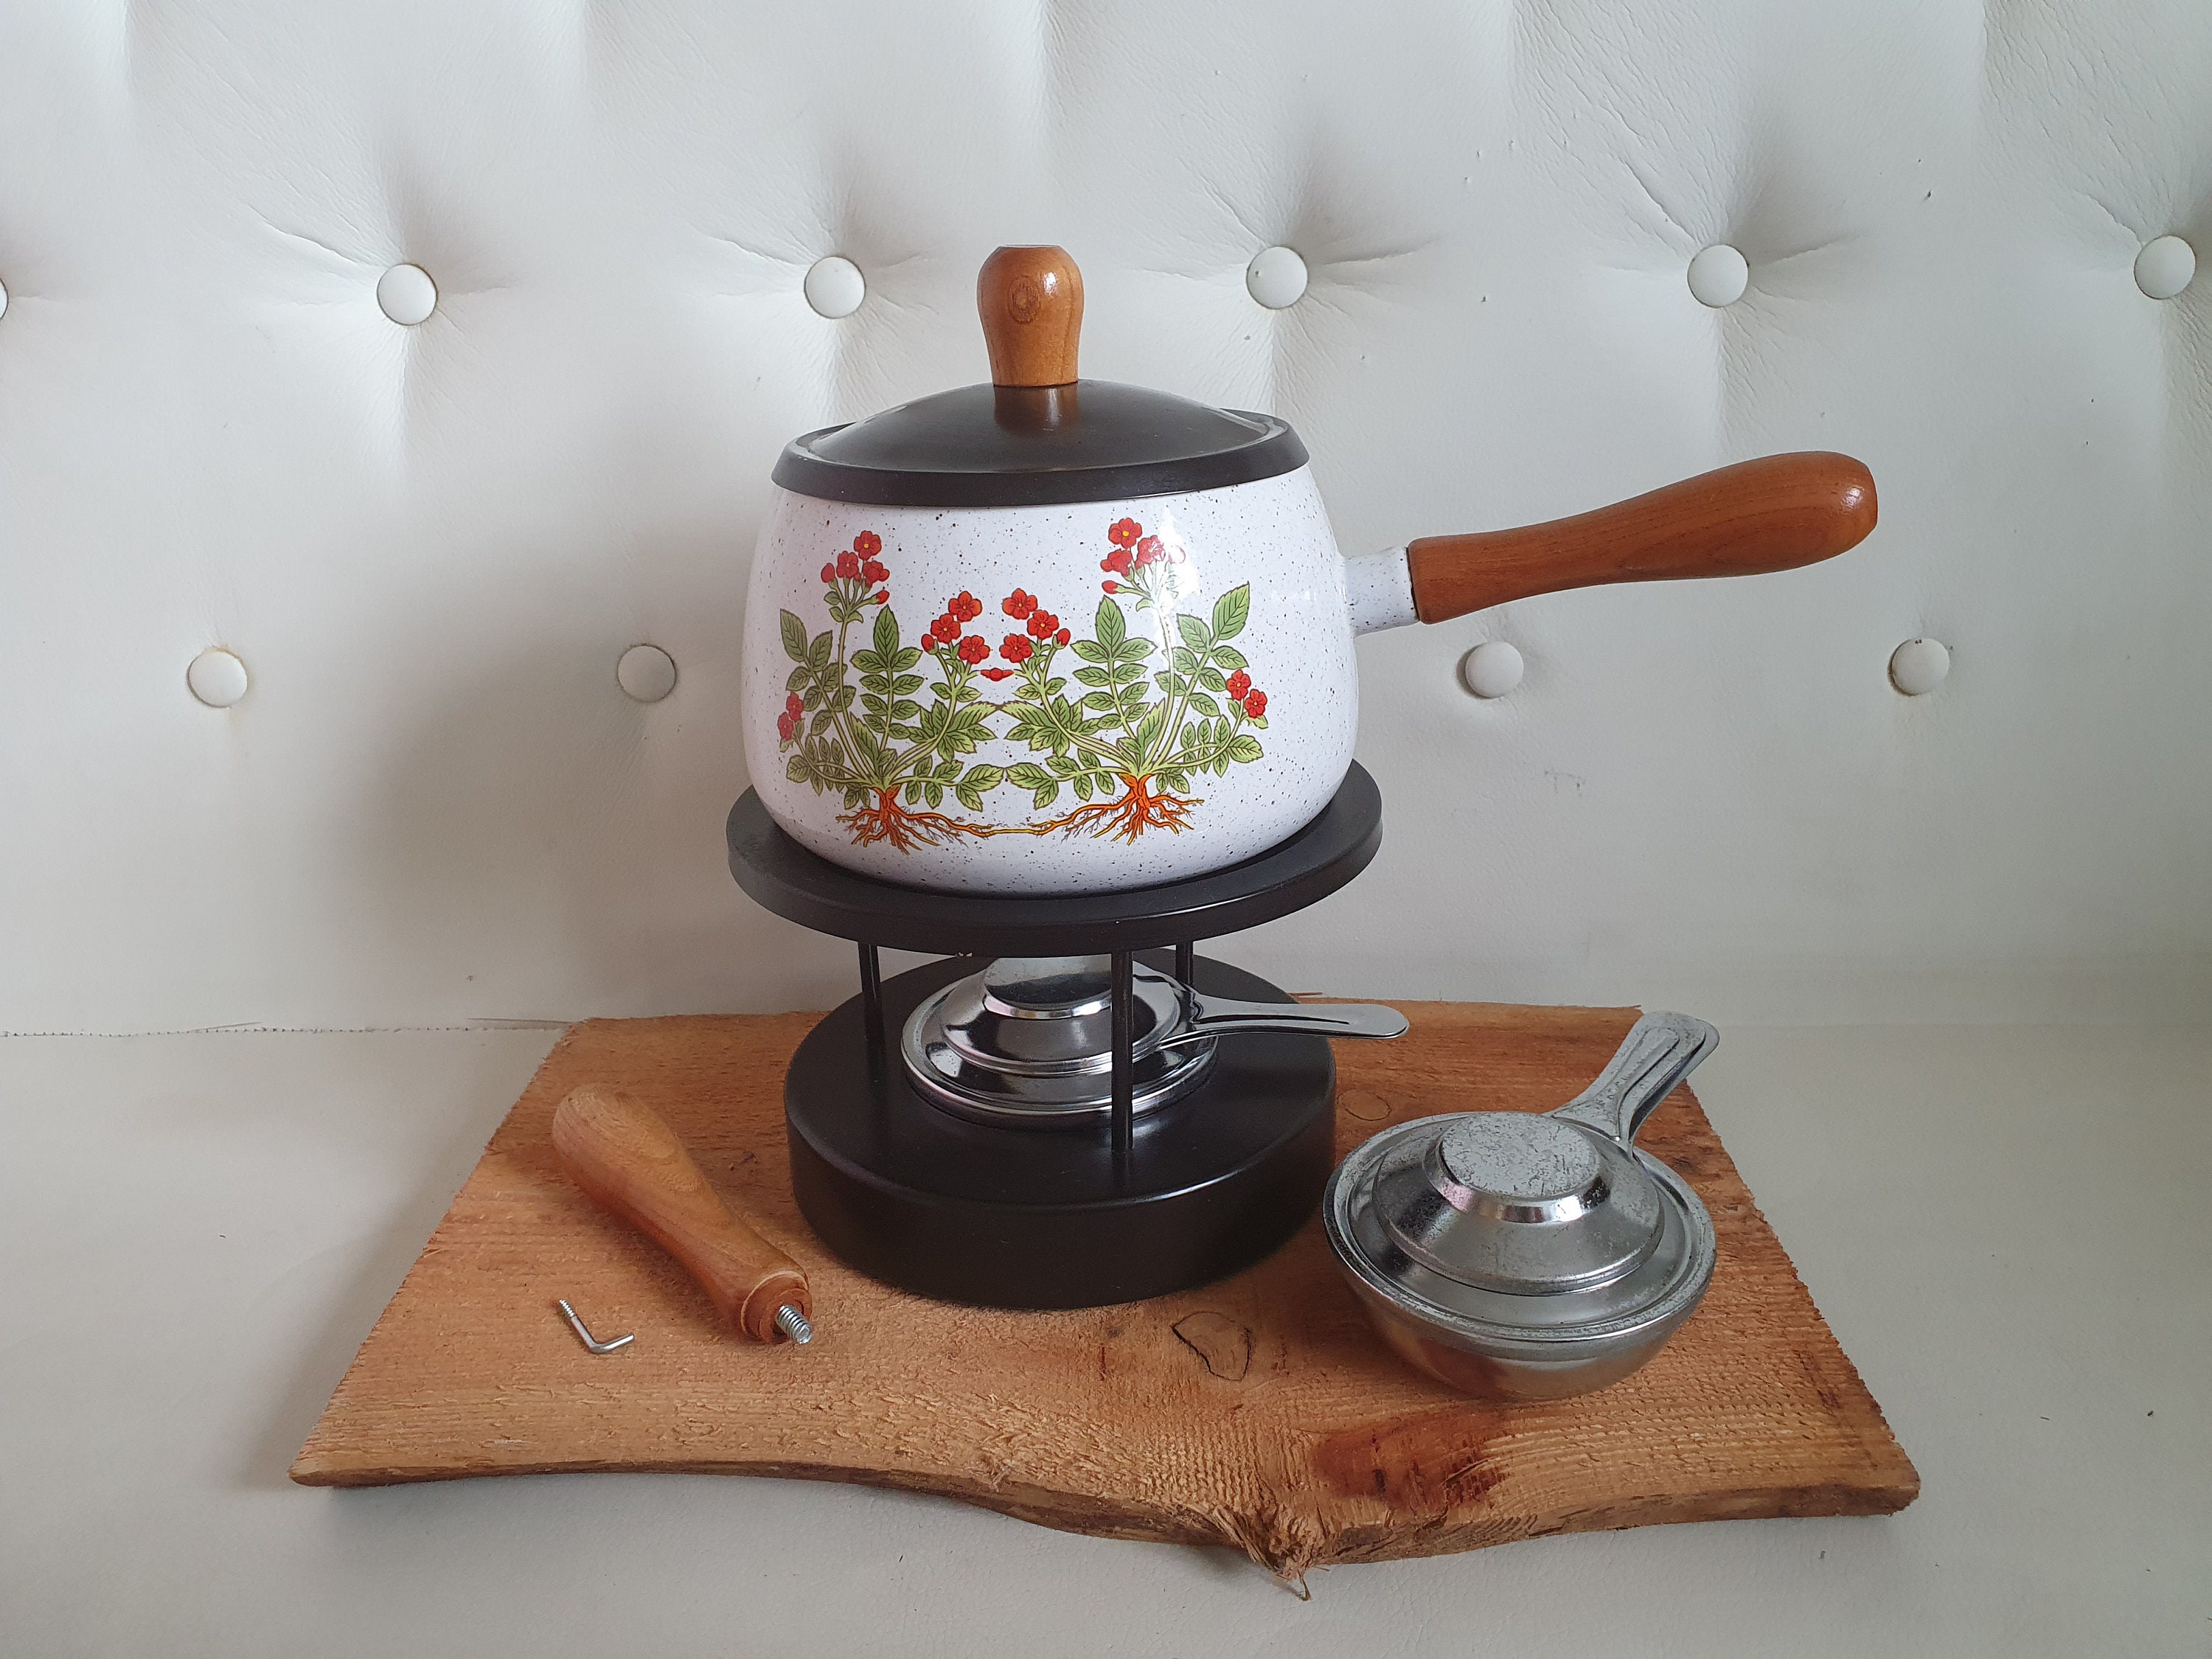 Double Chocolate Melting Pot Candy Melting Pot Automatic Temperature  Electric Pot Chocolate Fondue Chocolate Making Tool Electric Pot 